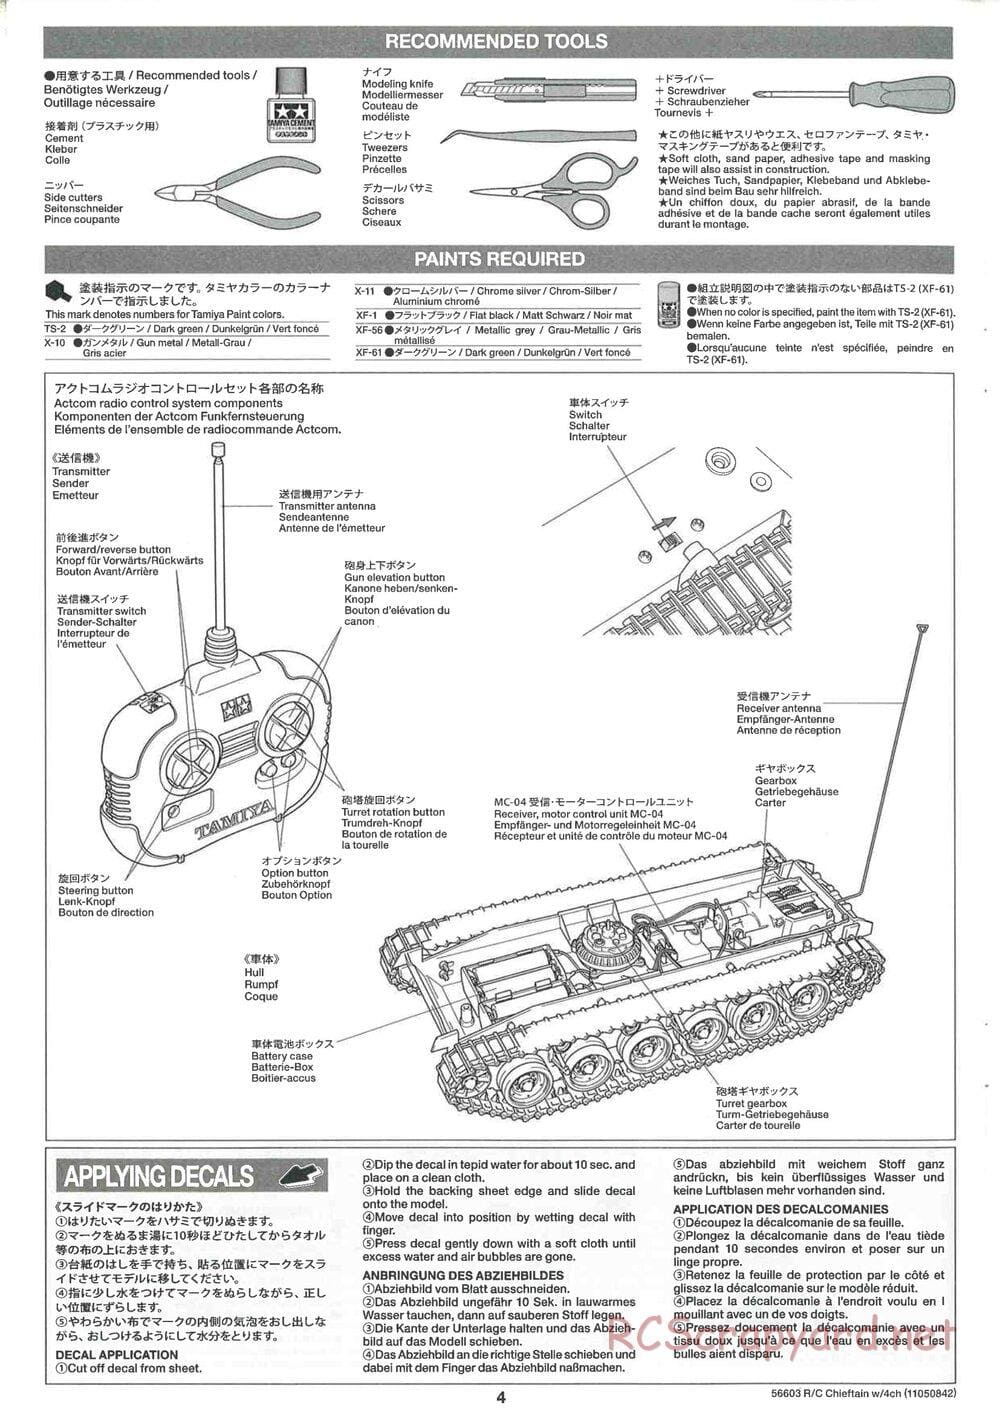 Tamiya - British Army Battle Tank Cheiftain - 1/25 Scale Chassis - Manual - Page 4